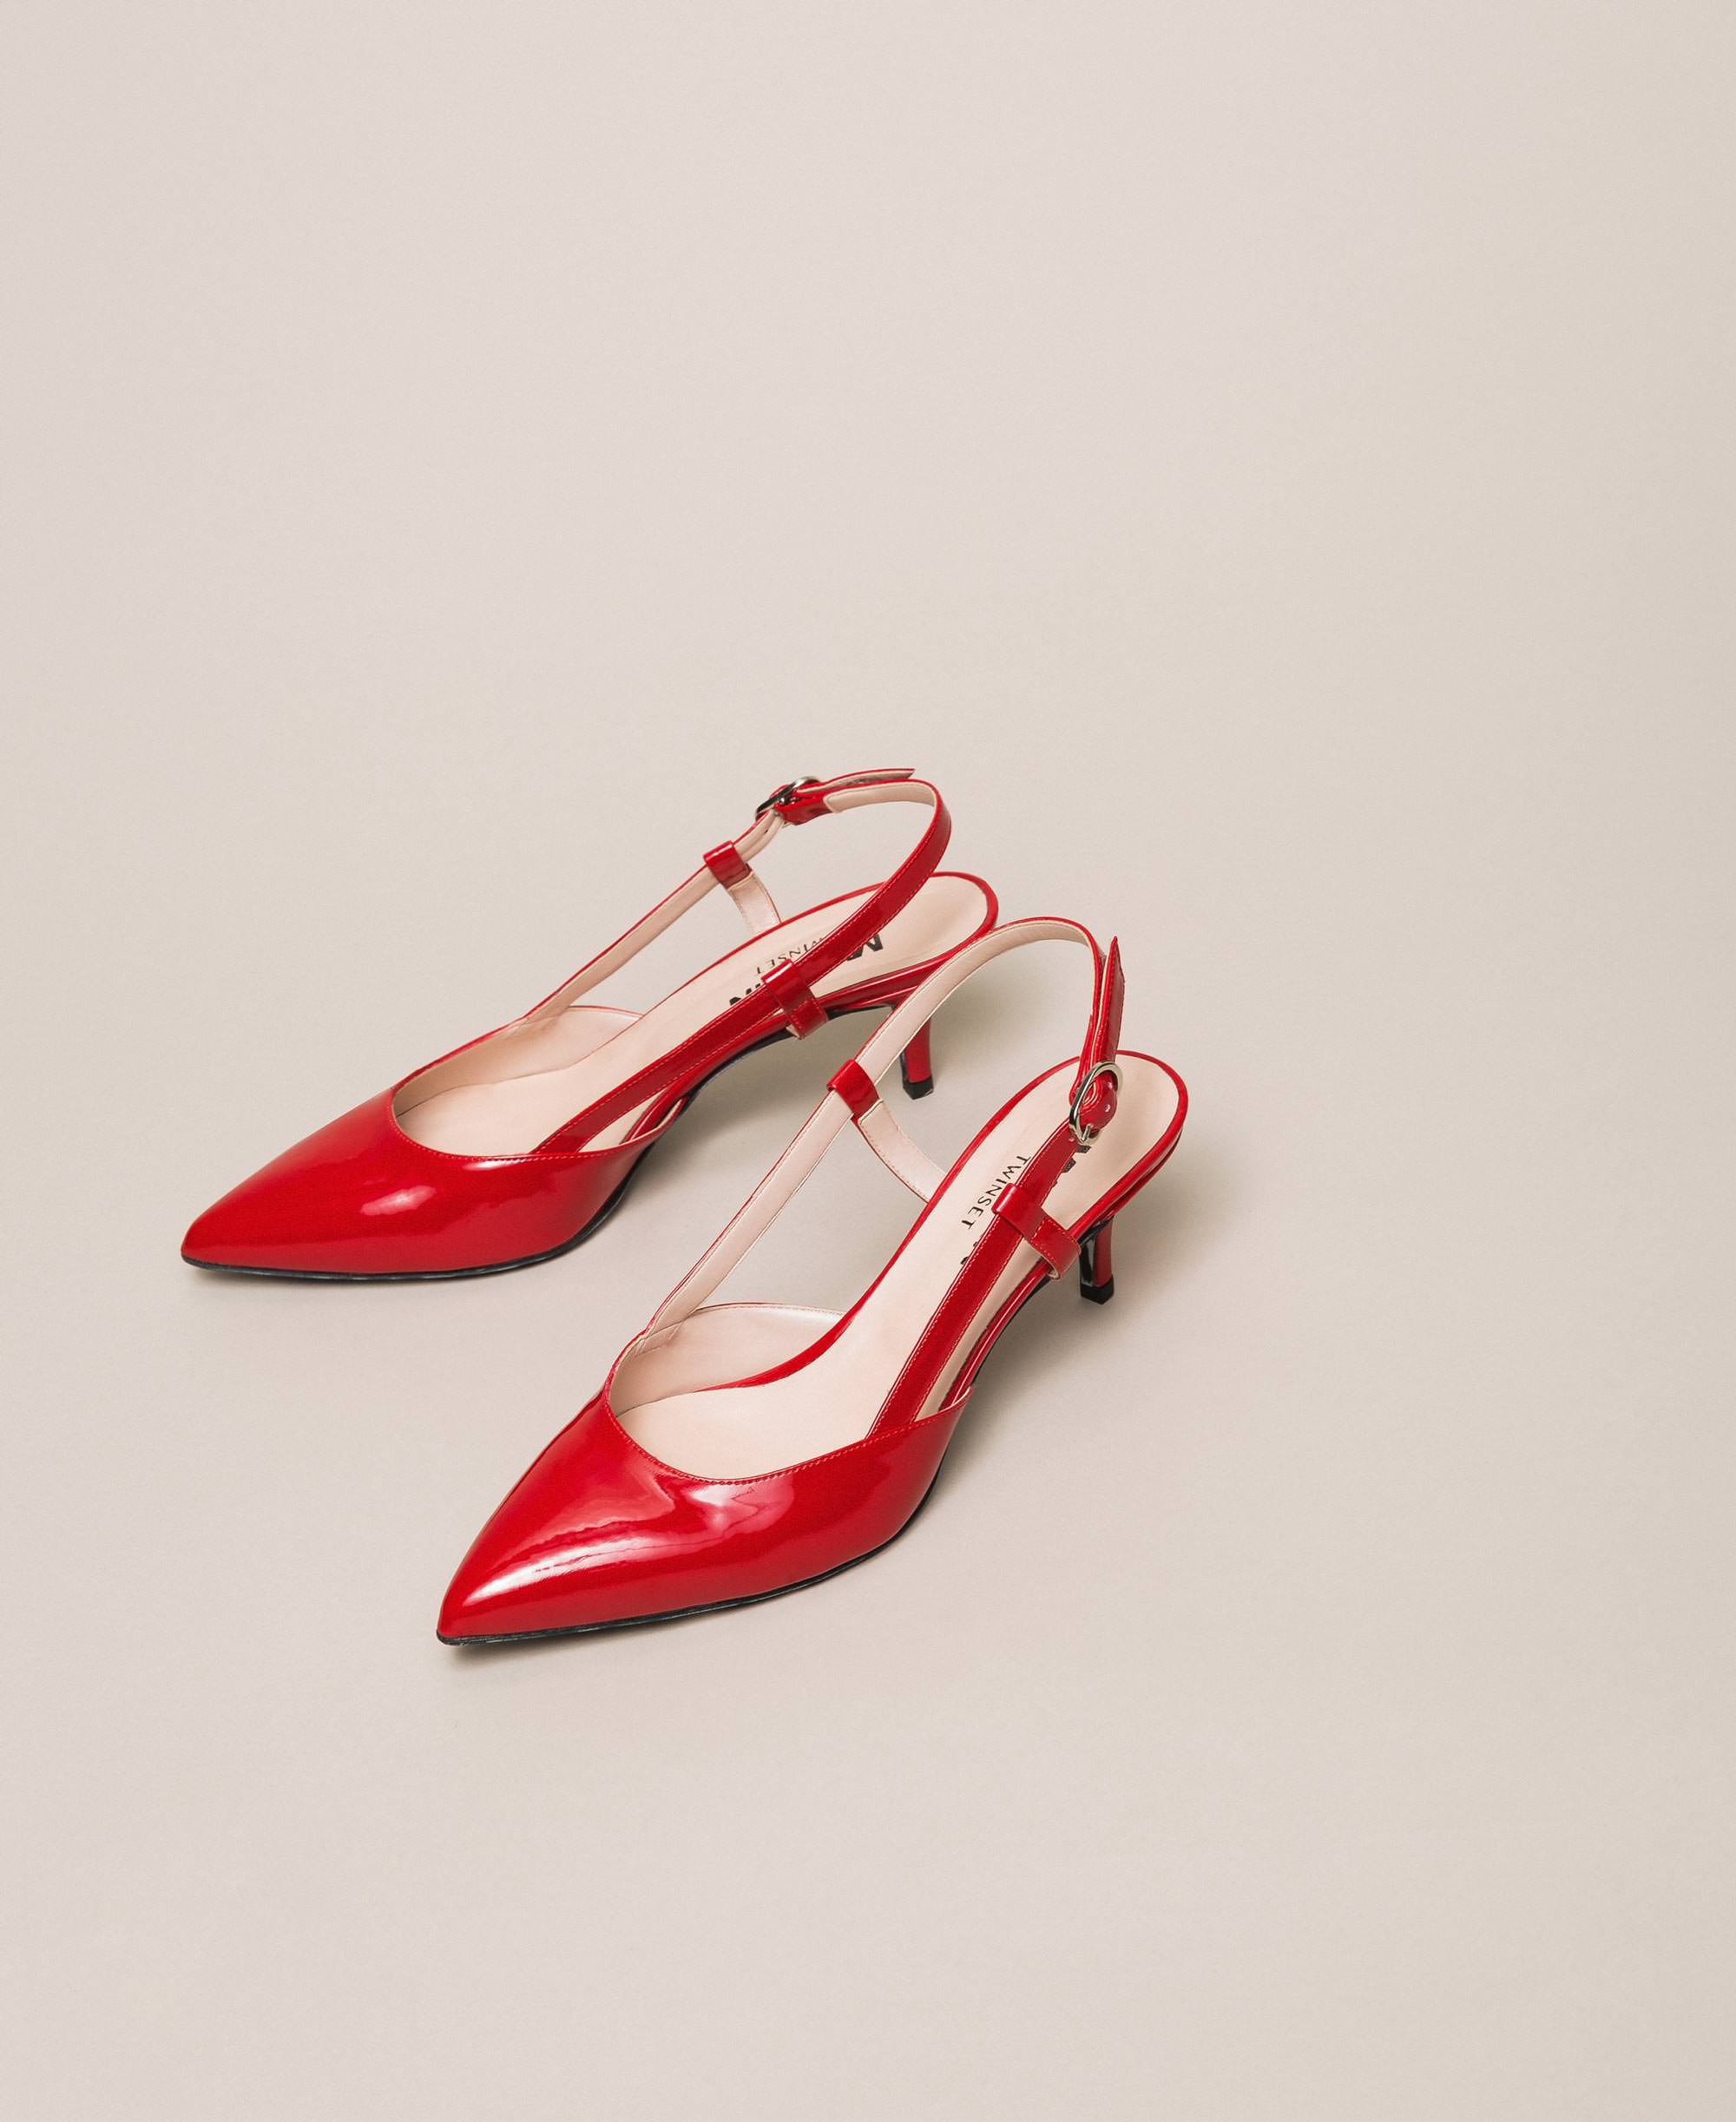 Patent leather slingback court shoes